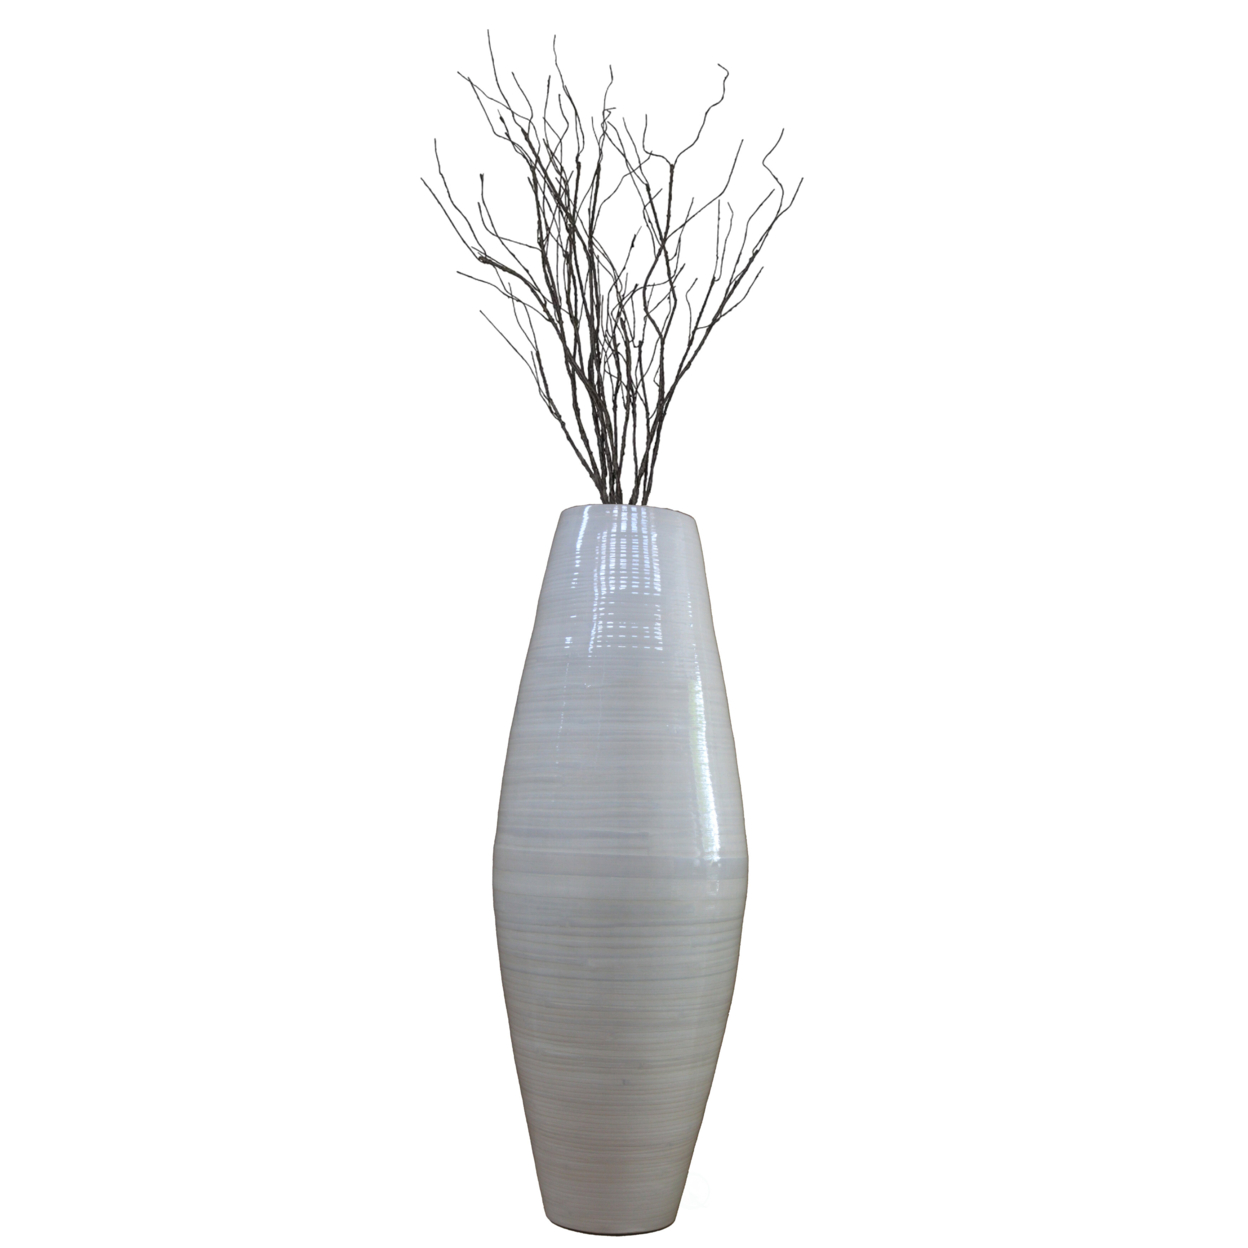 Uniquewise Bamboo Cylinder Shaped Floor Vase - Handcrafted Tall Decorative Vase - Ideal For Dining Room, Living Room, And Entryway - White L